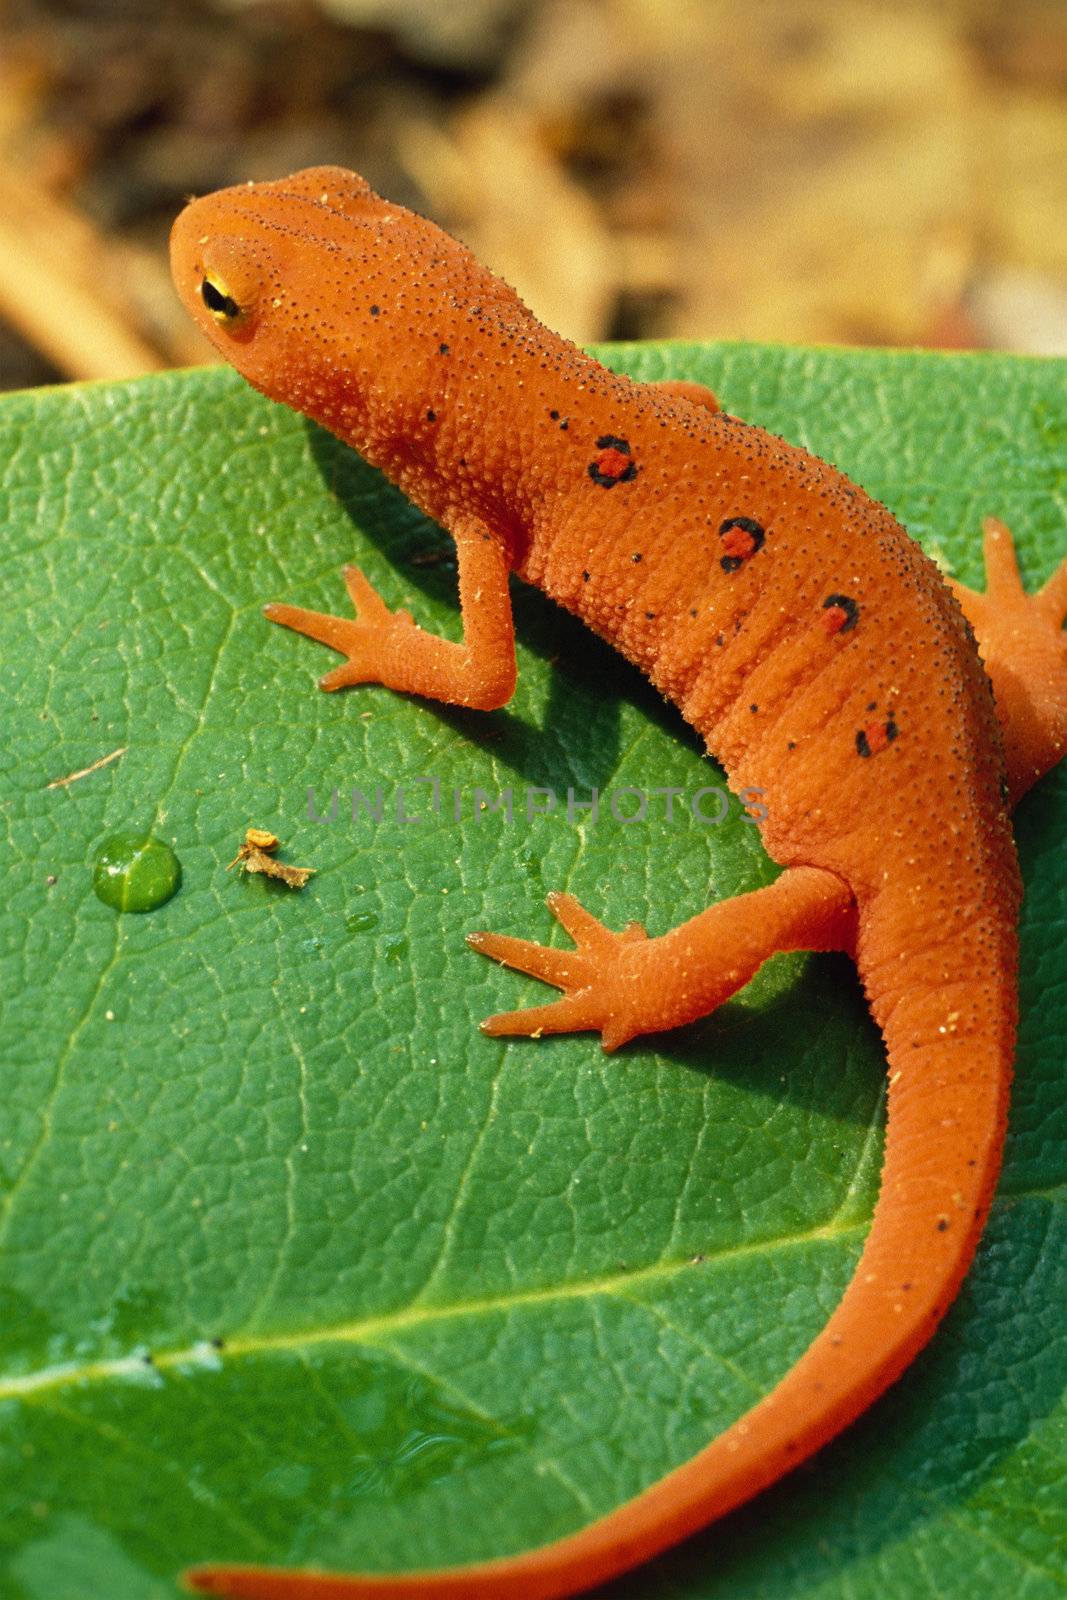 Red Spotted Newt, or Eastern Newt, on Green Leaf